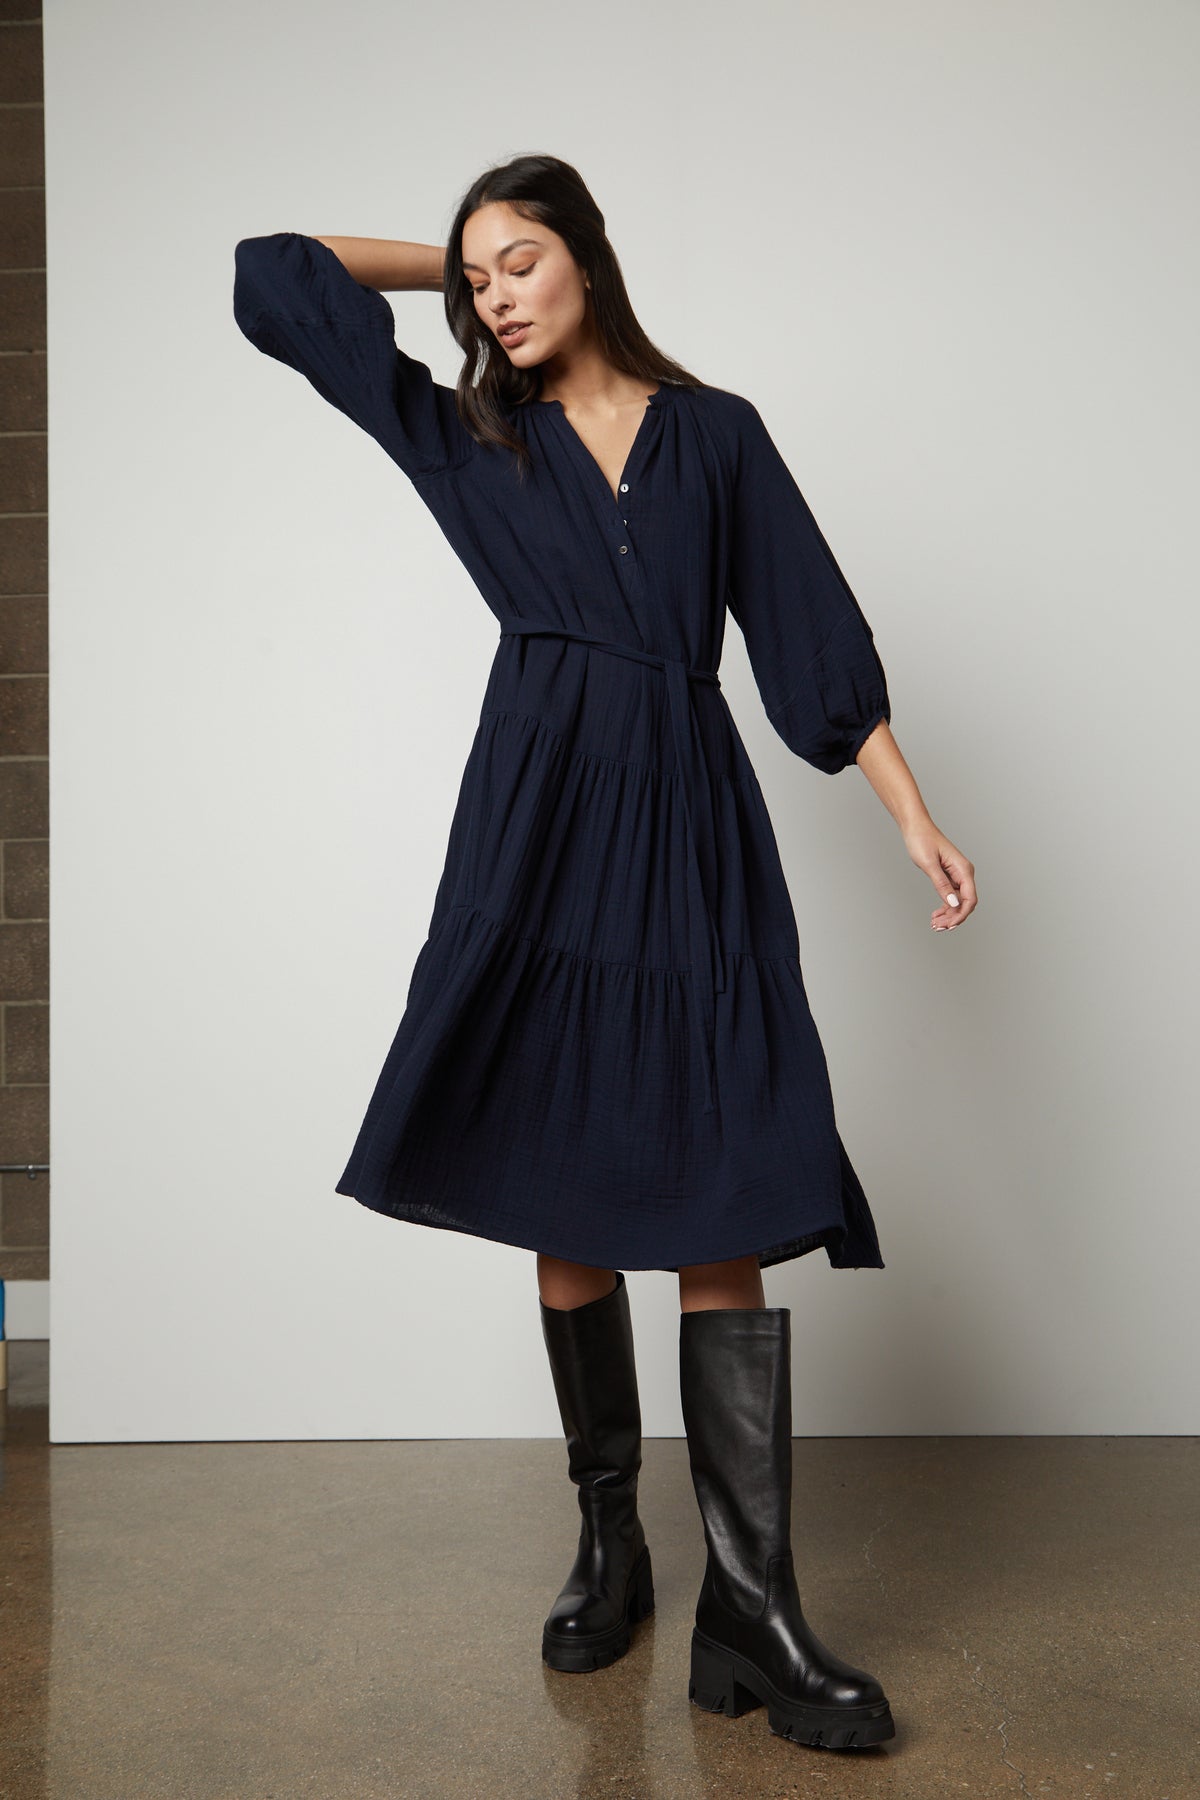   The model is wearing a Velvet by Graham & Spencer DIXON COTTON GAUZE TIERED DRESS and black boots. 